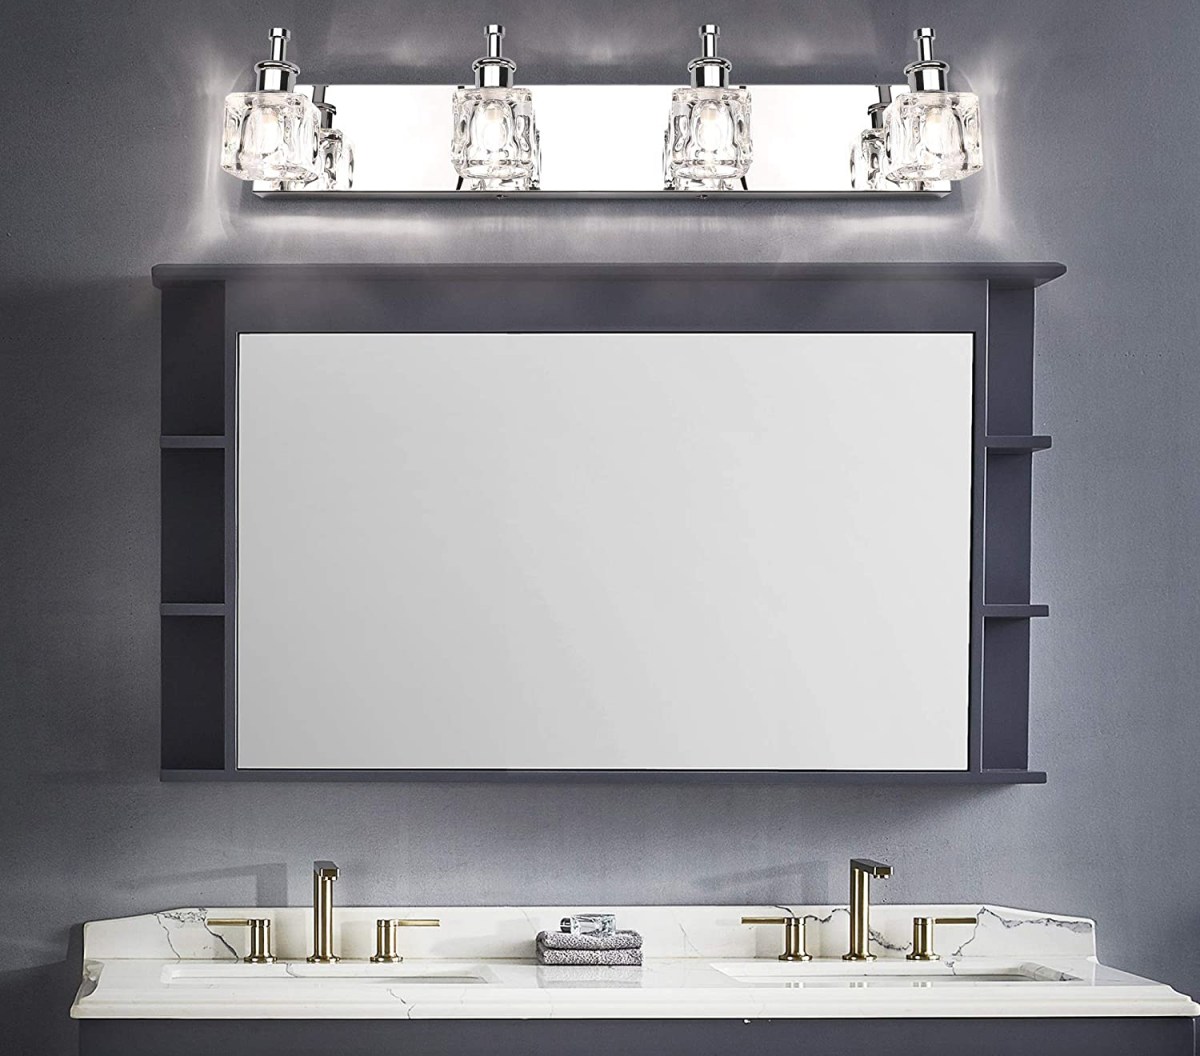 The best vanity light installed over a mirror and double-sink vanity.